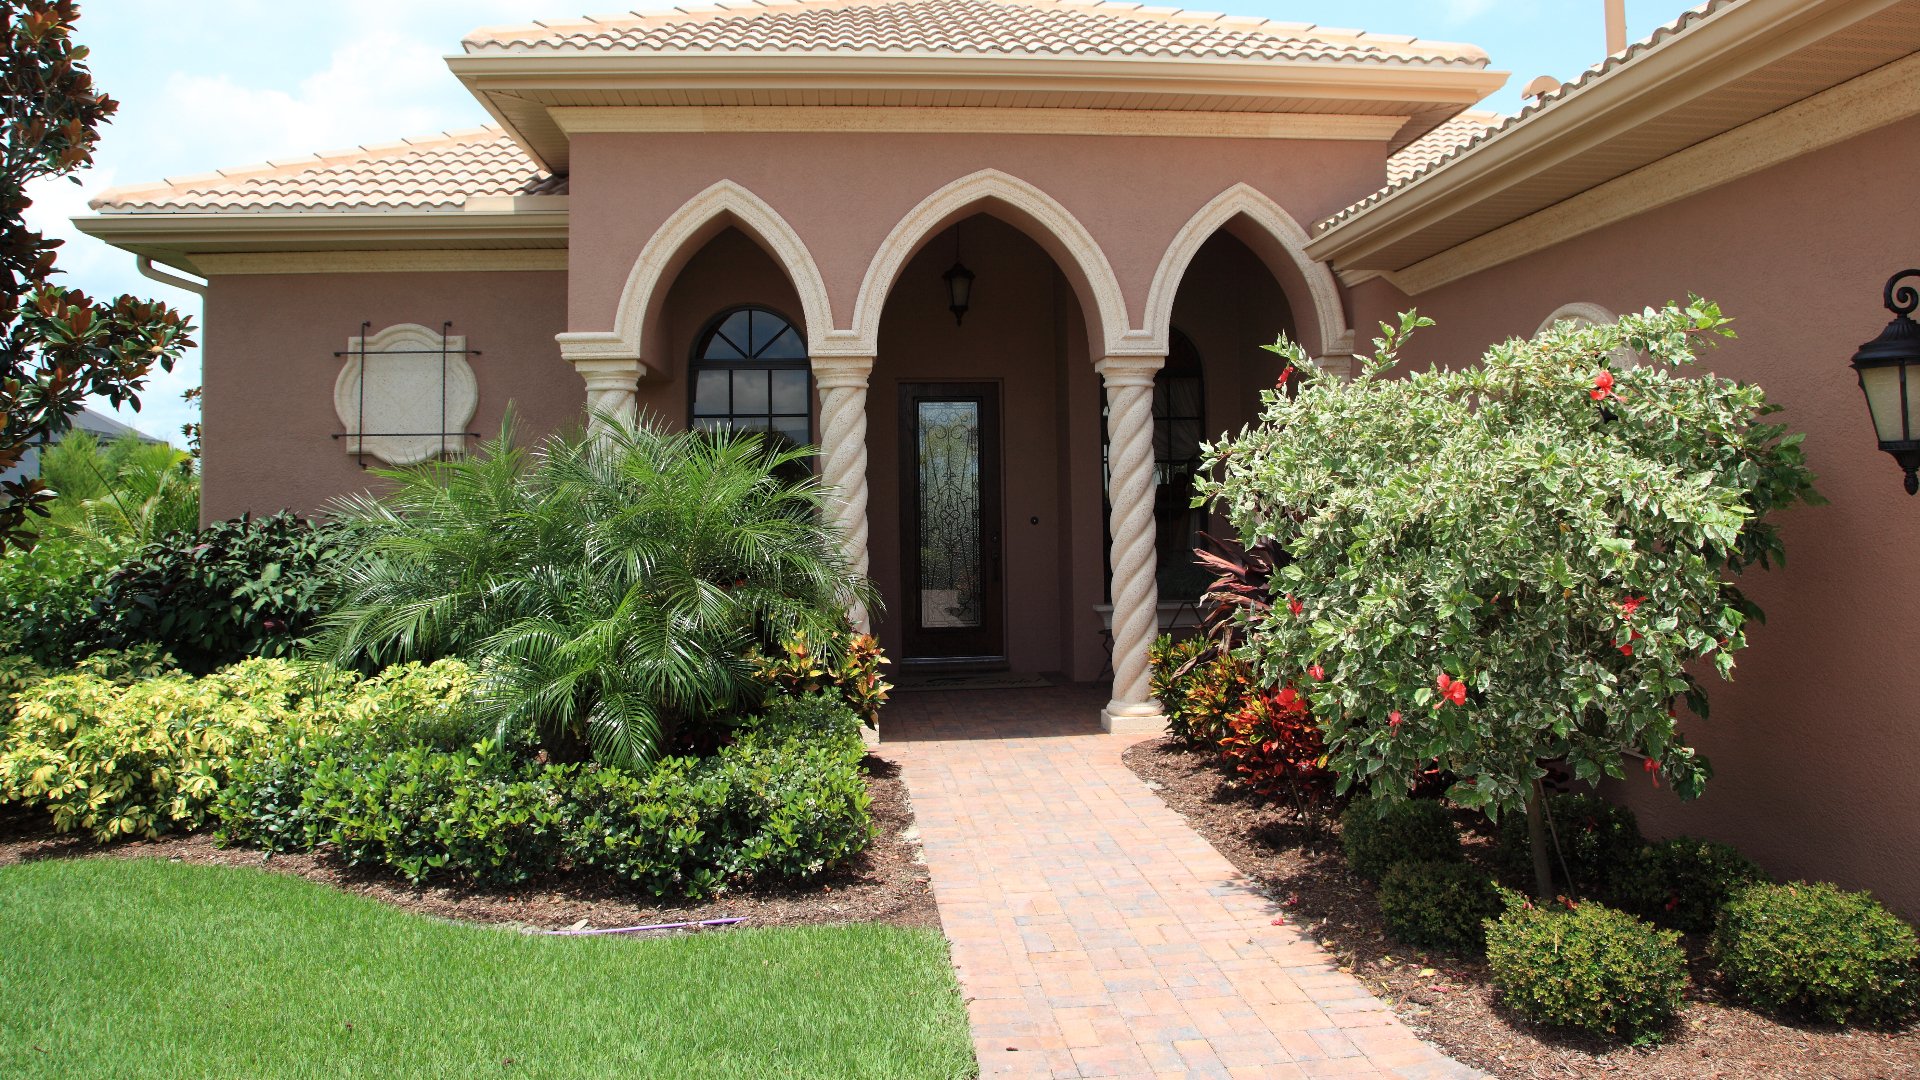 Landscaping services in Ormond Beach, FL.